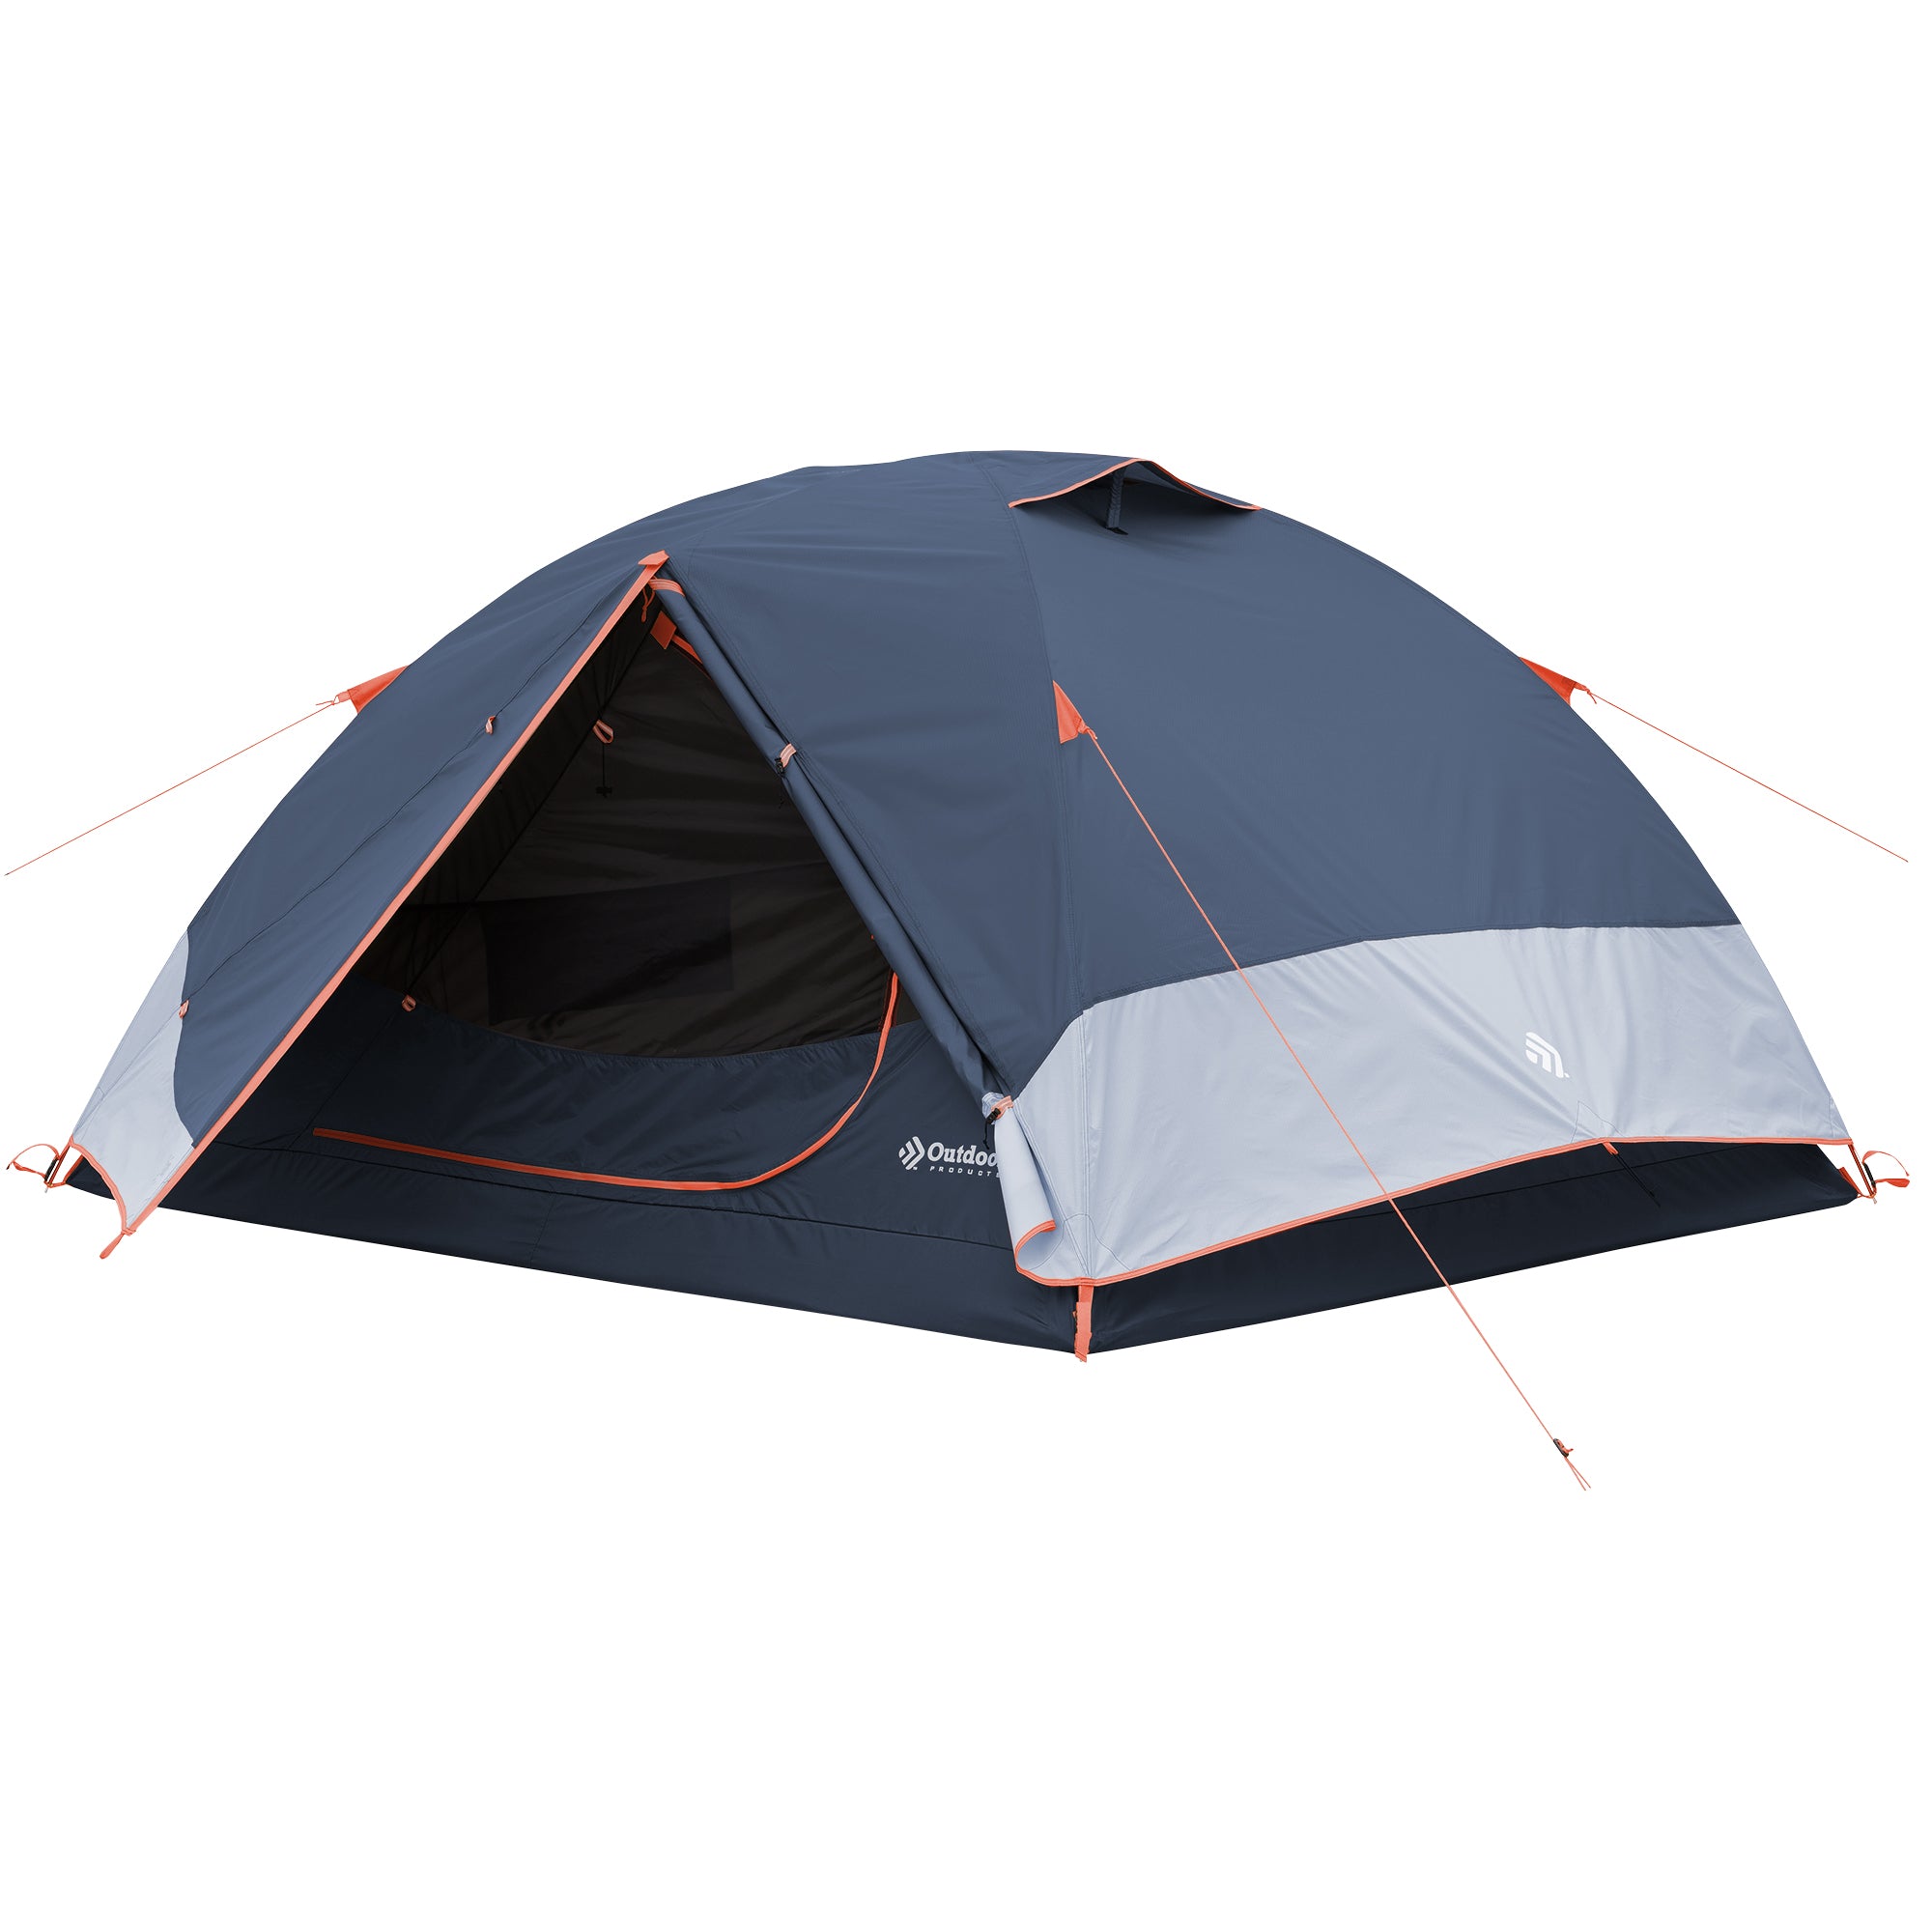 Tents for camping 4 person • Compare best prices »